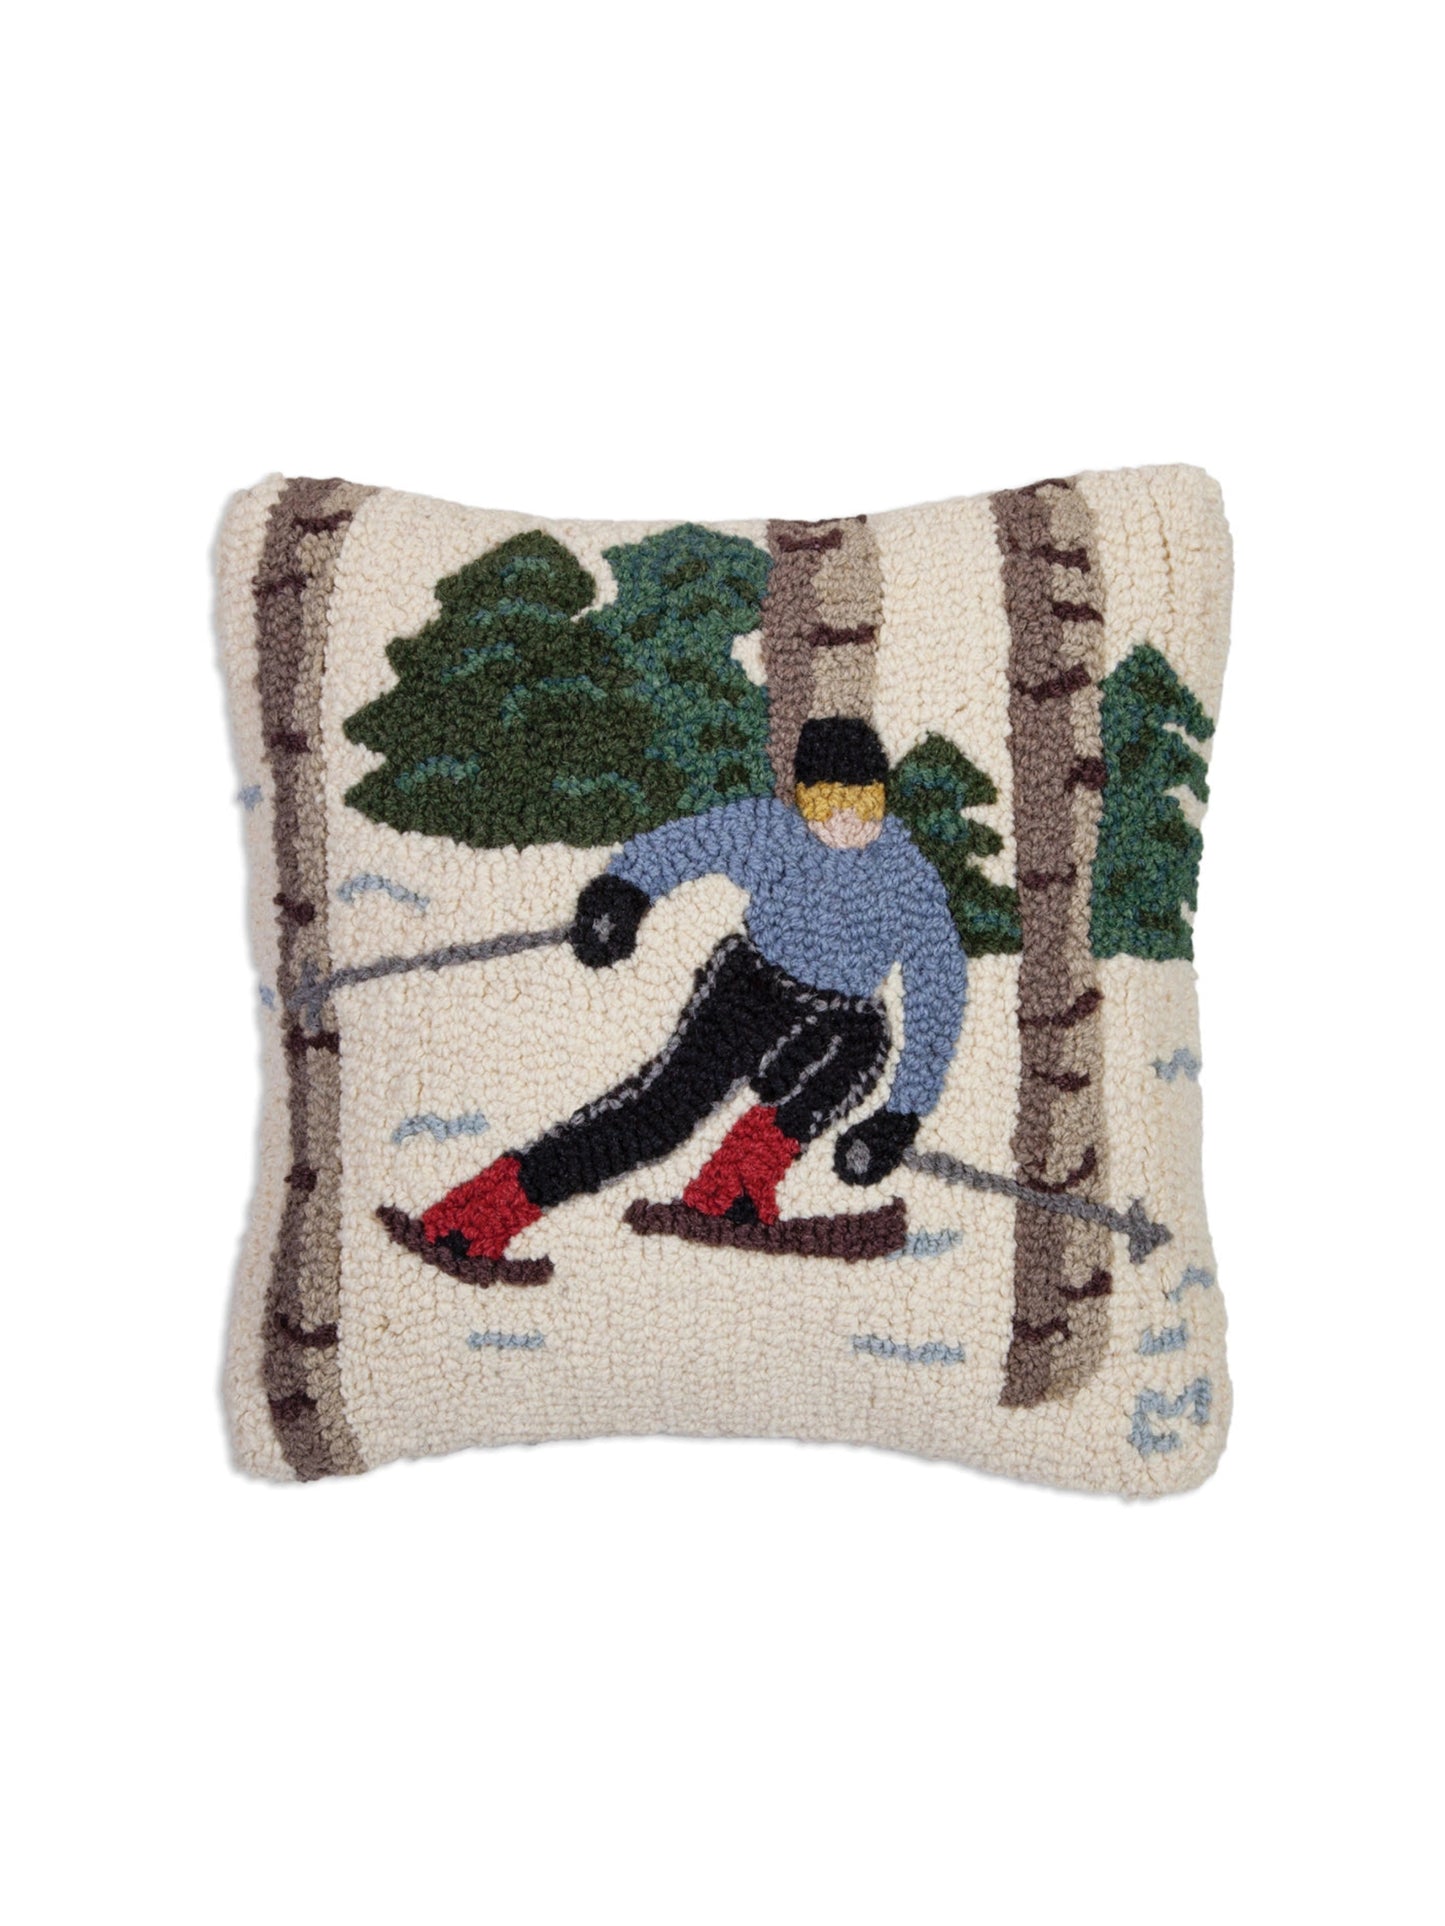 Skiing in The Trees Hooked Wool Pillow Weston Table